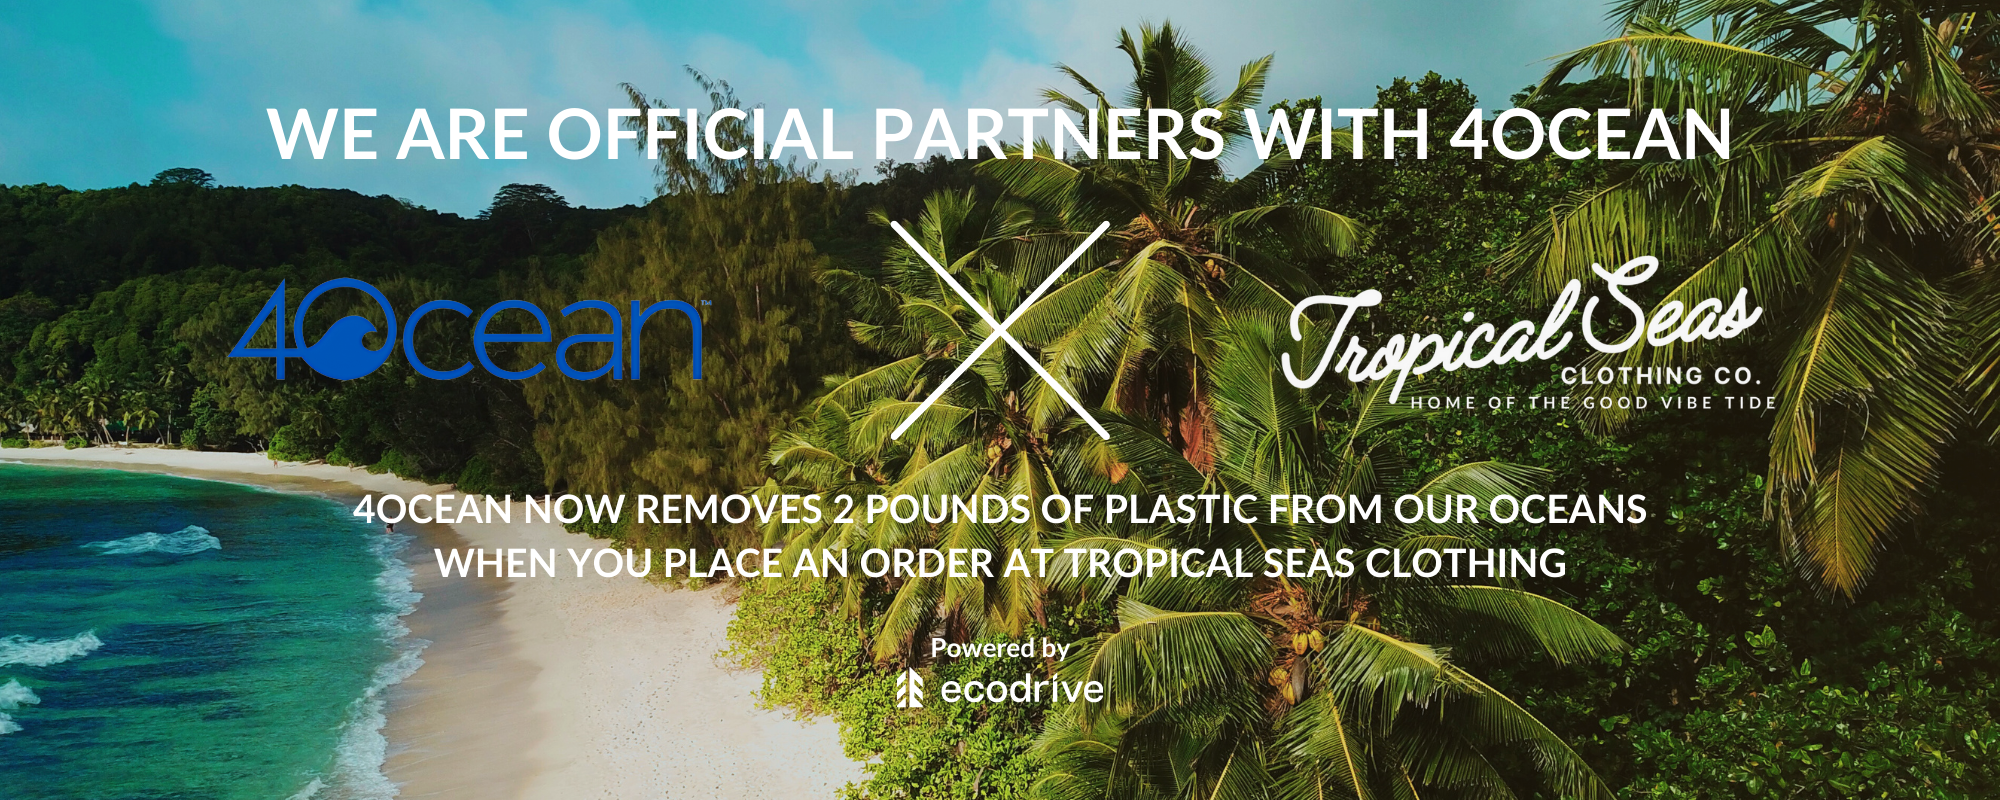 Tropical Seas Clothing has partnered with 4Ocean, a leading organization in ocean cleanup and conservation efforts. This exciting collaboration marks a significant step forward in our shared commitment to preserving the health and beauty of our oceans